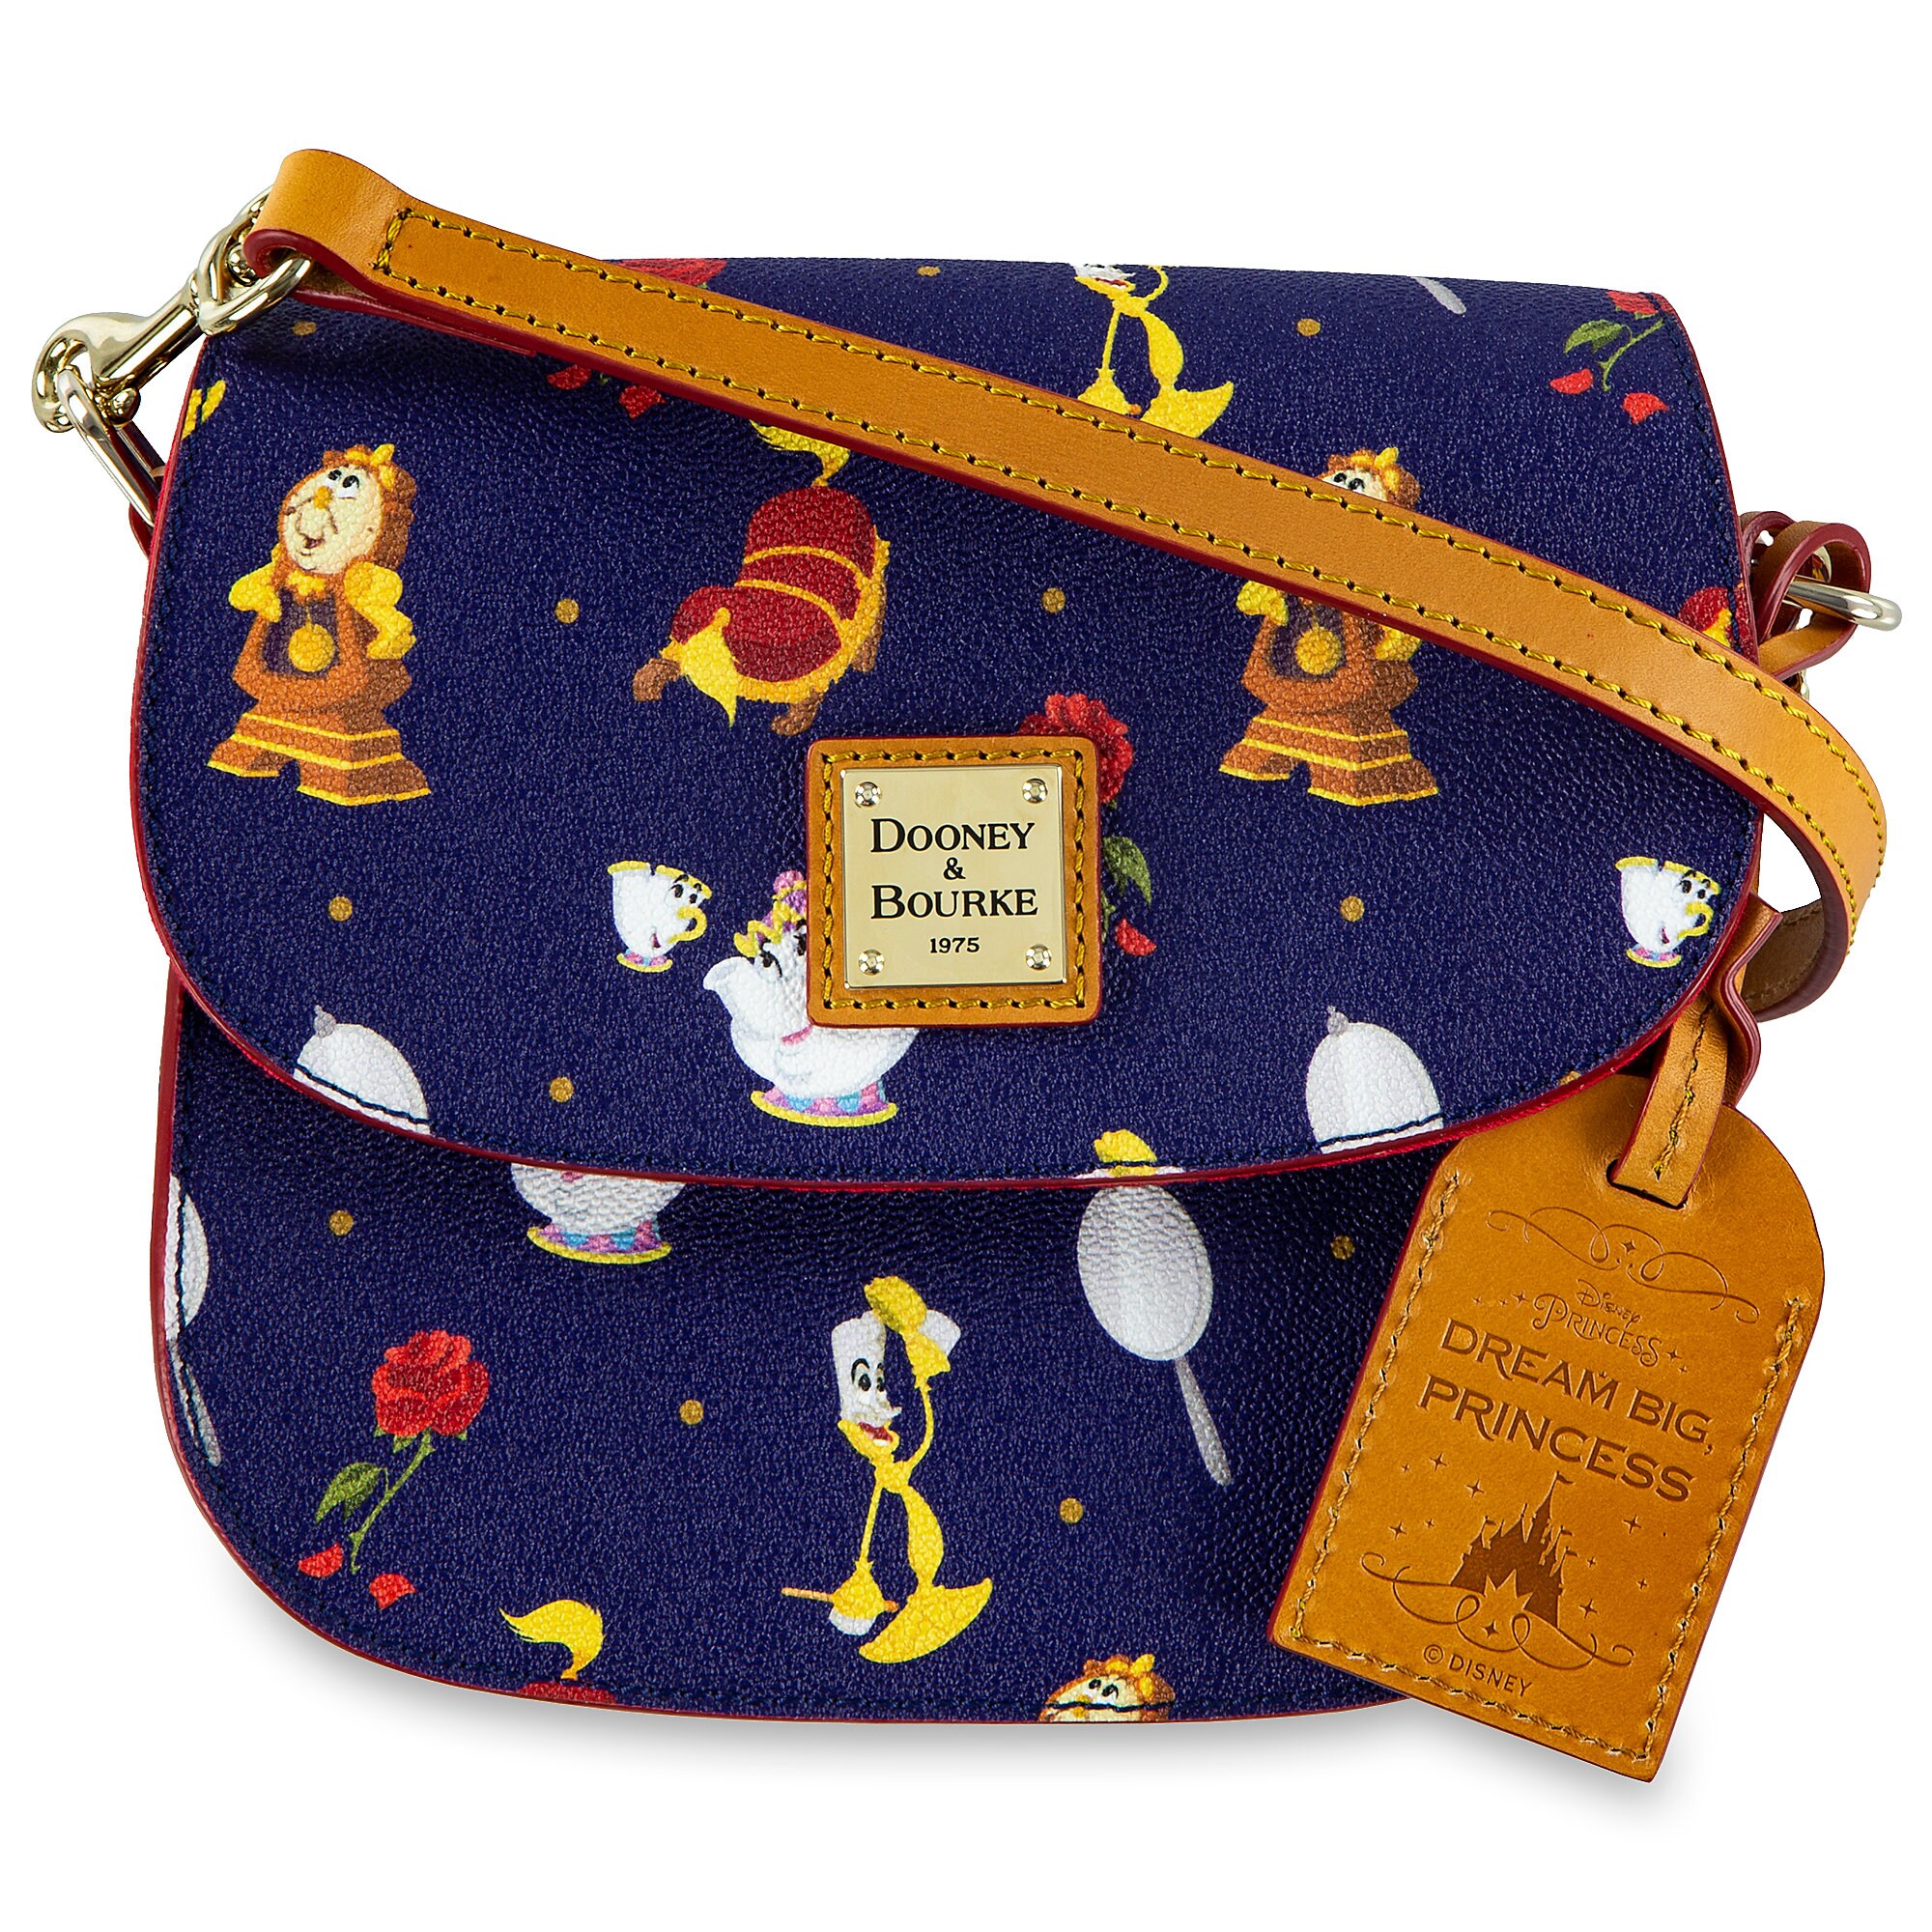 Beauty and the Beast Crossbody Bag by Dooney & Bourke